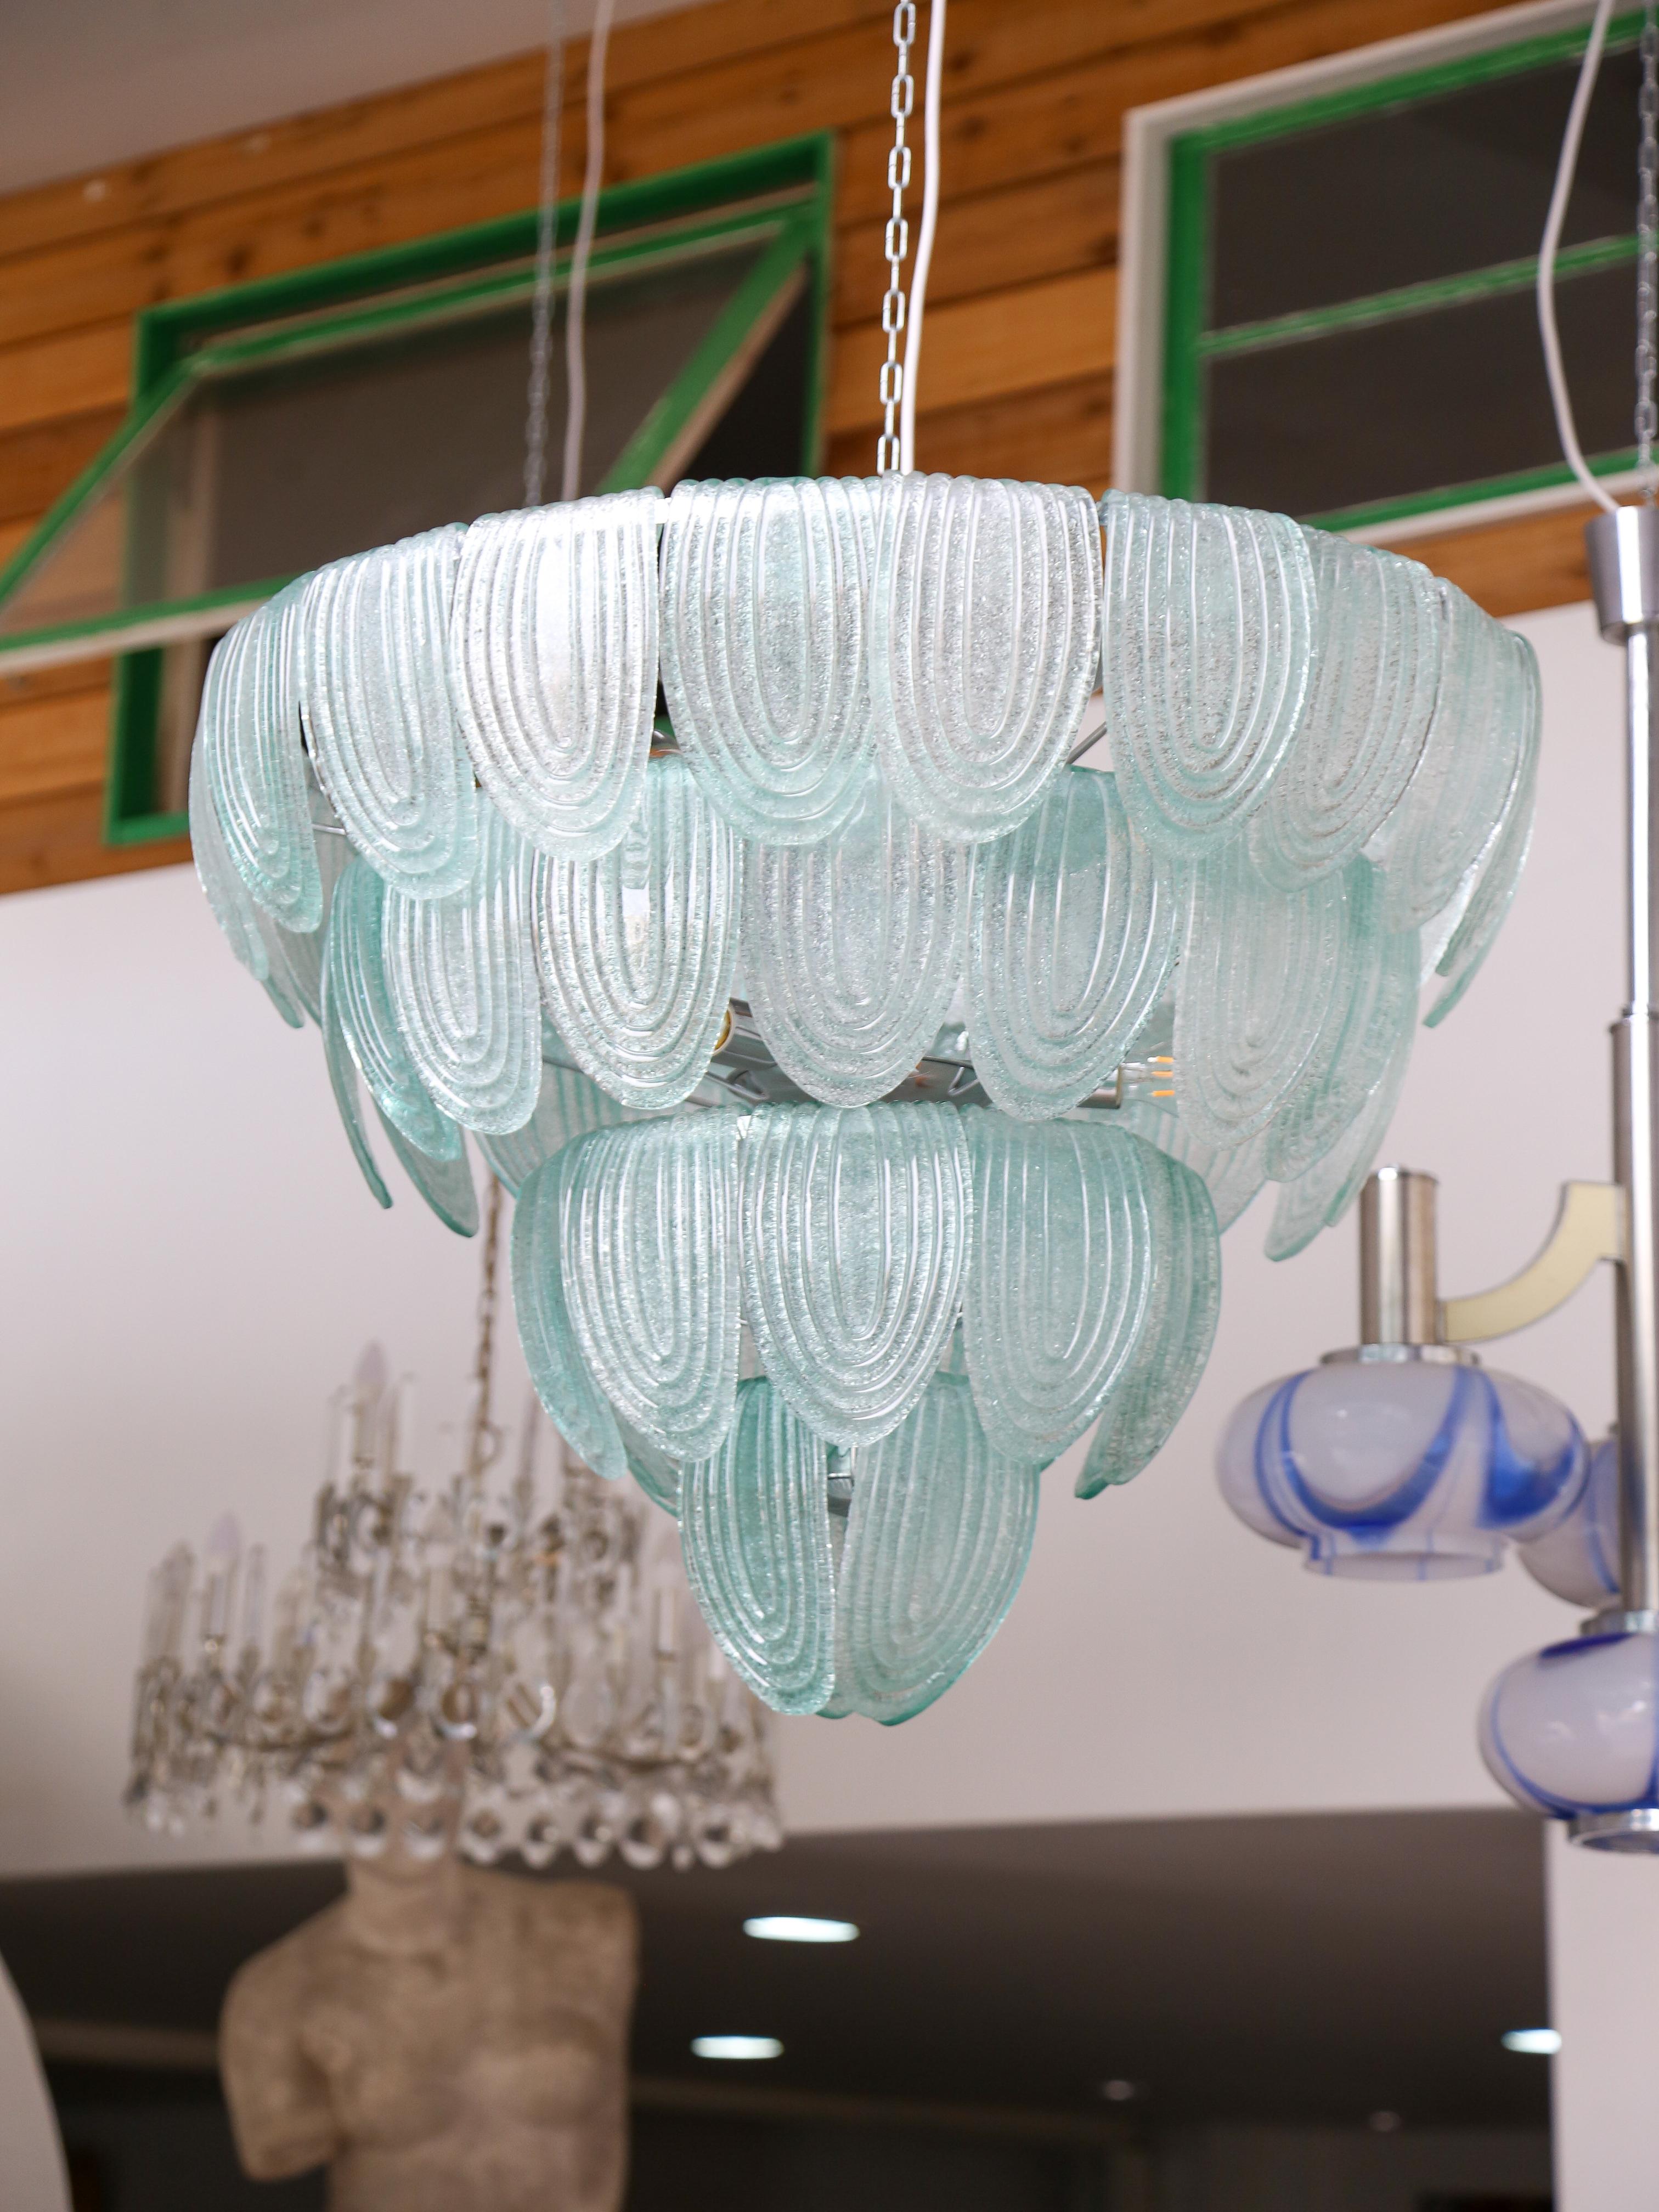 Statement piece Murano green glass chandelier featuring a metal frame with four levels of saddles and eleven internal light bulbs. (total number of glass saddles is 54)
This chandelier is a luxurious and elegant lighting fixture made but also a work